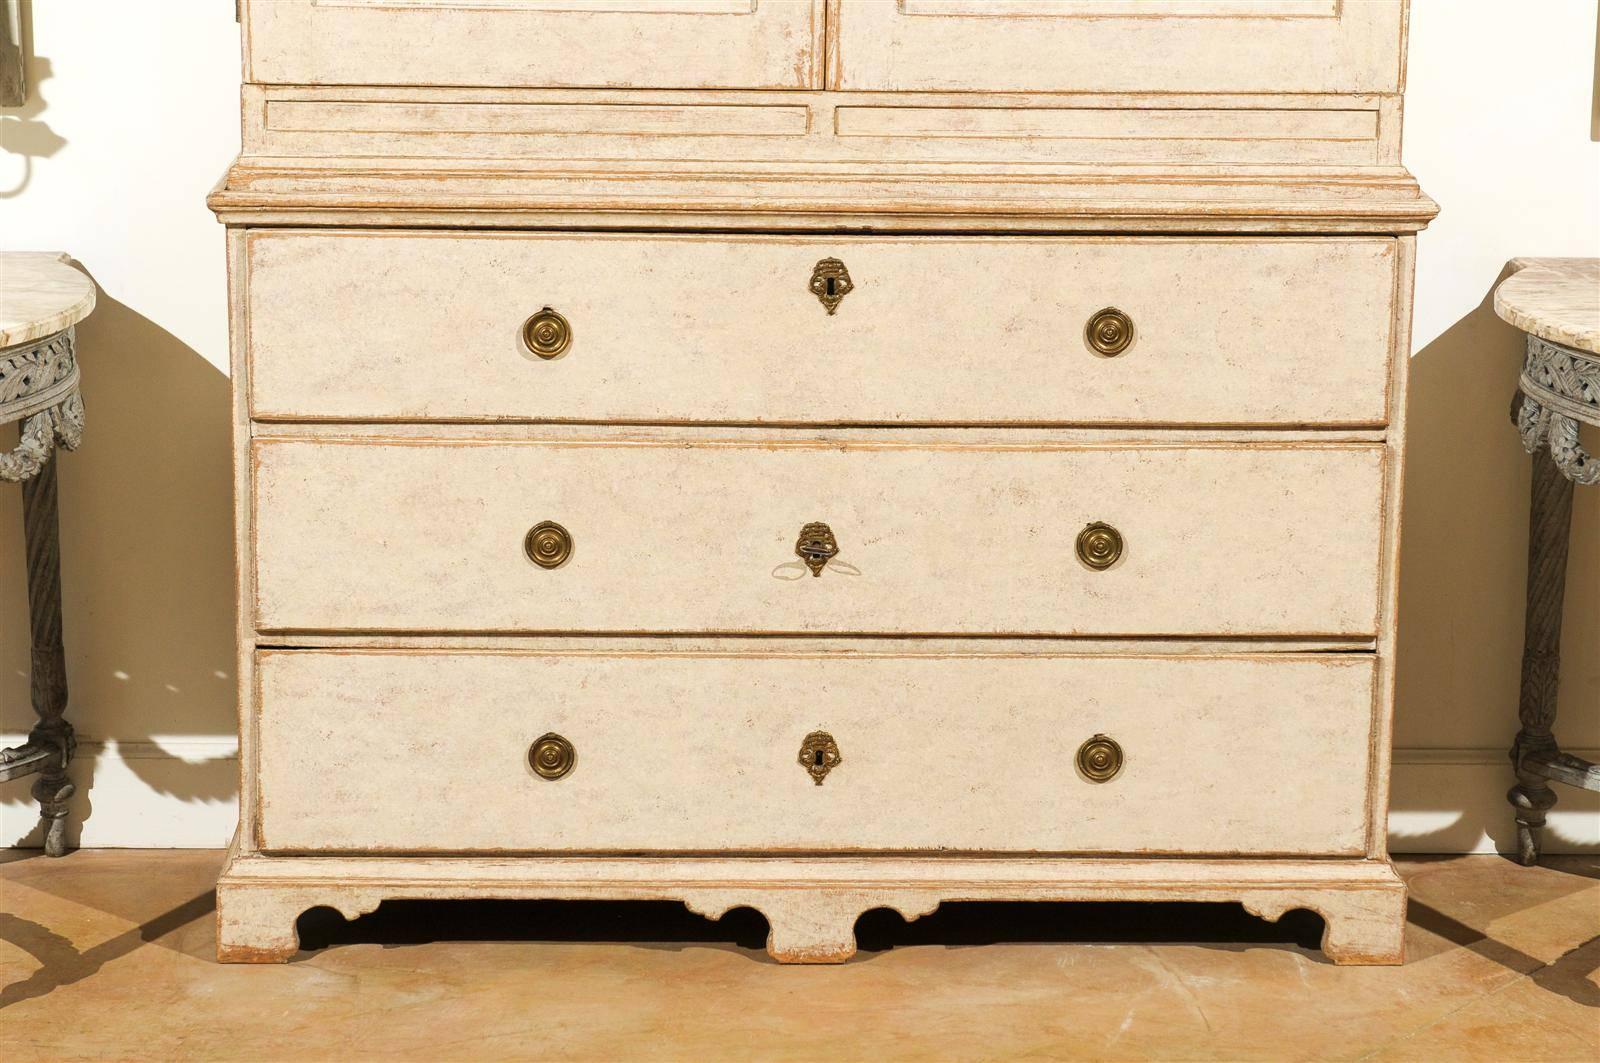 Swedish Mid 18th Century Period Rococo Painted Cabinet with Doors over Drawers 2